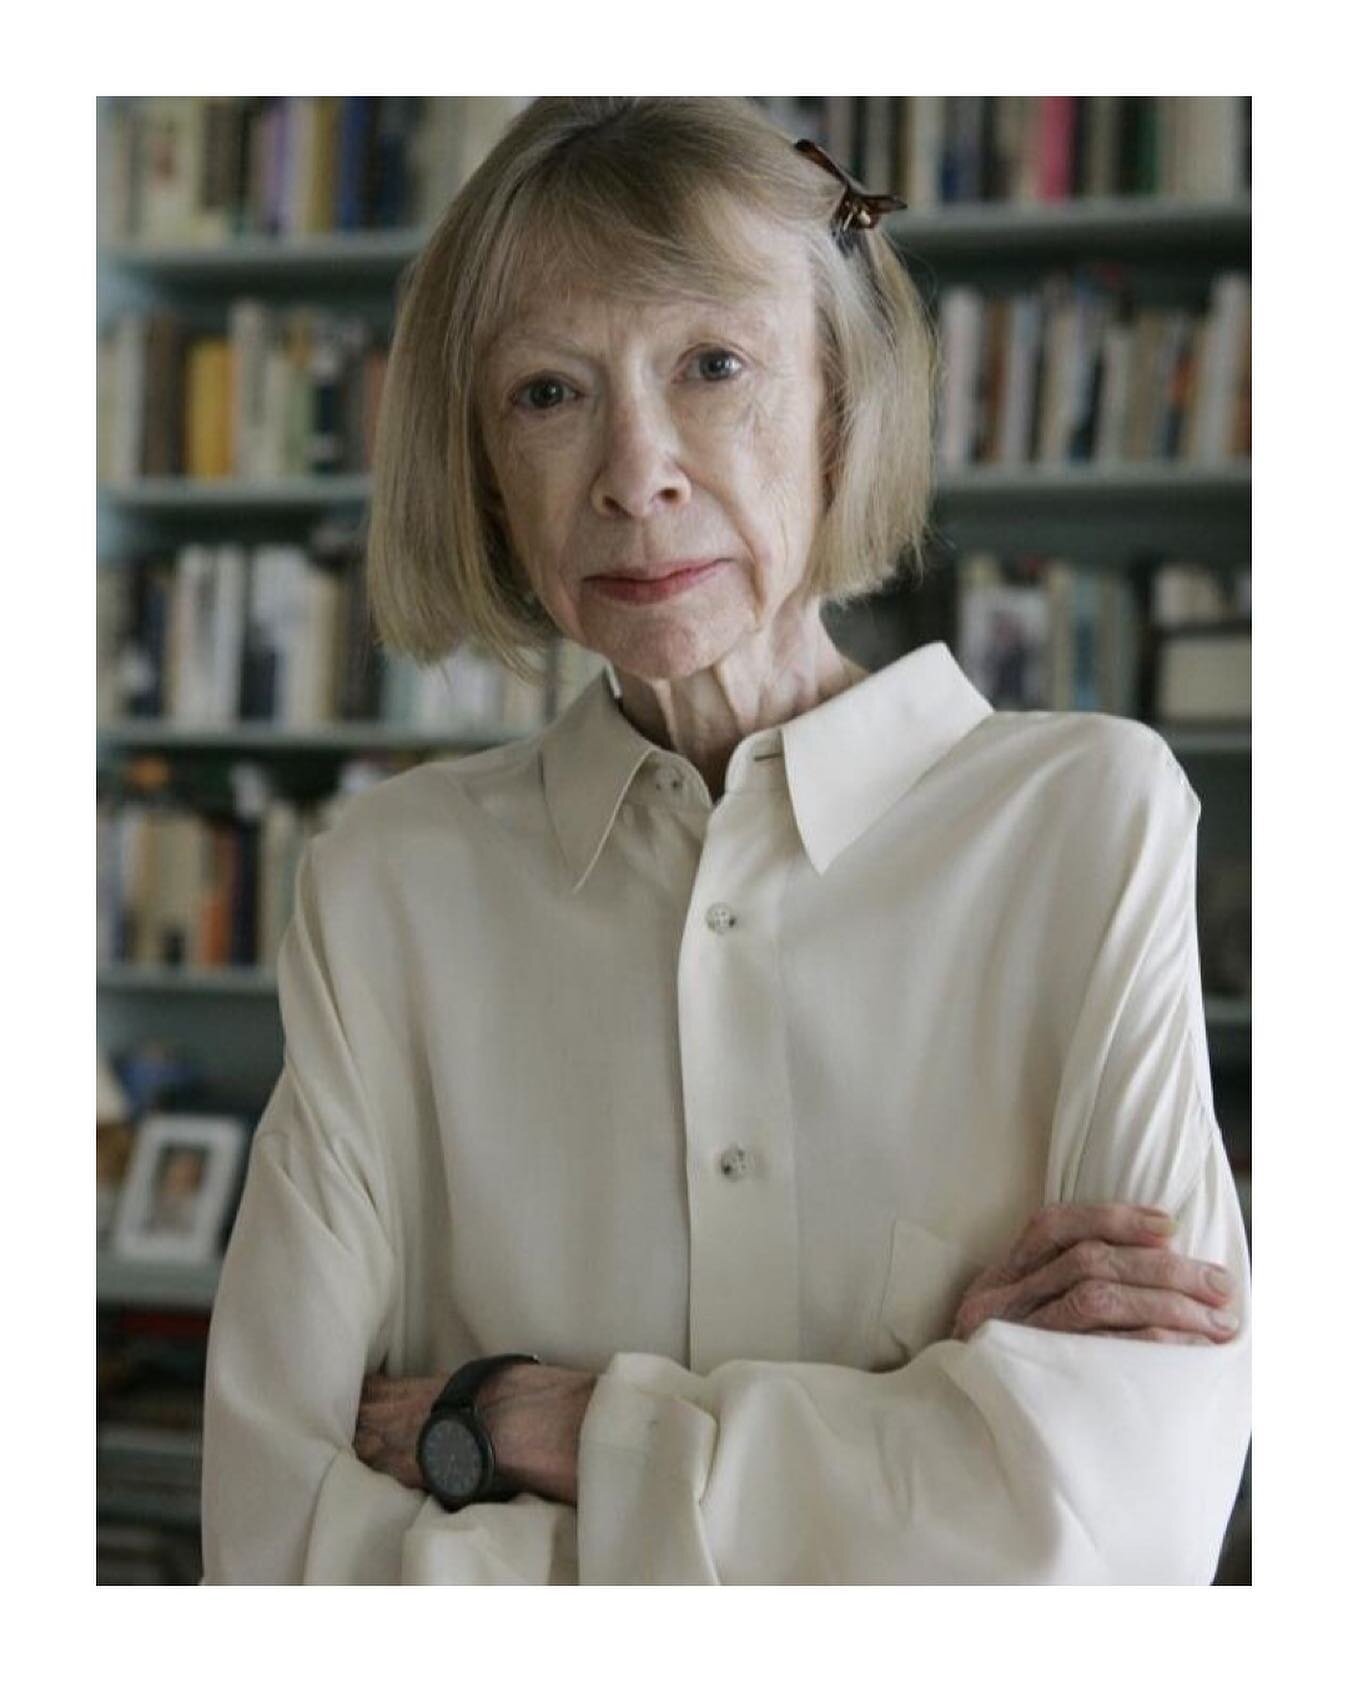 A small tribute to literary hero Joan Didion up on the site.